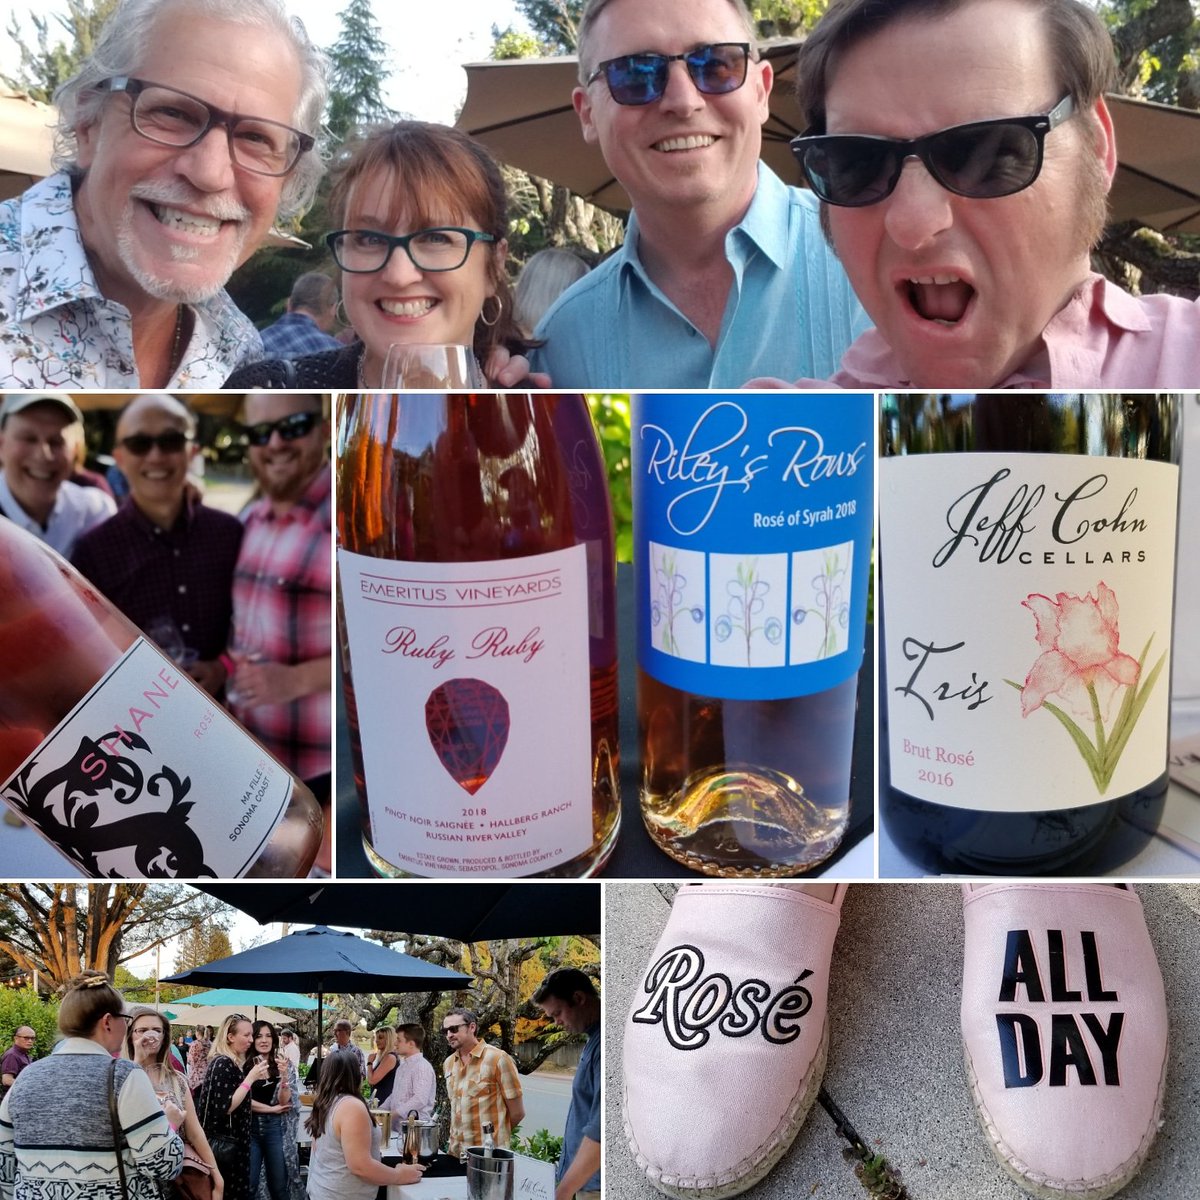 #PinkOut Pt 1!!! Prepping for a #PinkMoon in style! Thx to the great wineries & guests who joined us at the 3rd Annual #RosesofSonomaCounty Tasting at #GravensteinGrill! /// #SawyerSomm #roseeverday #rosealltheway